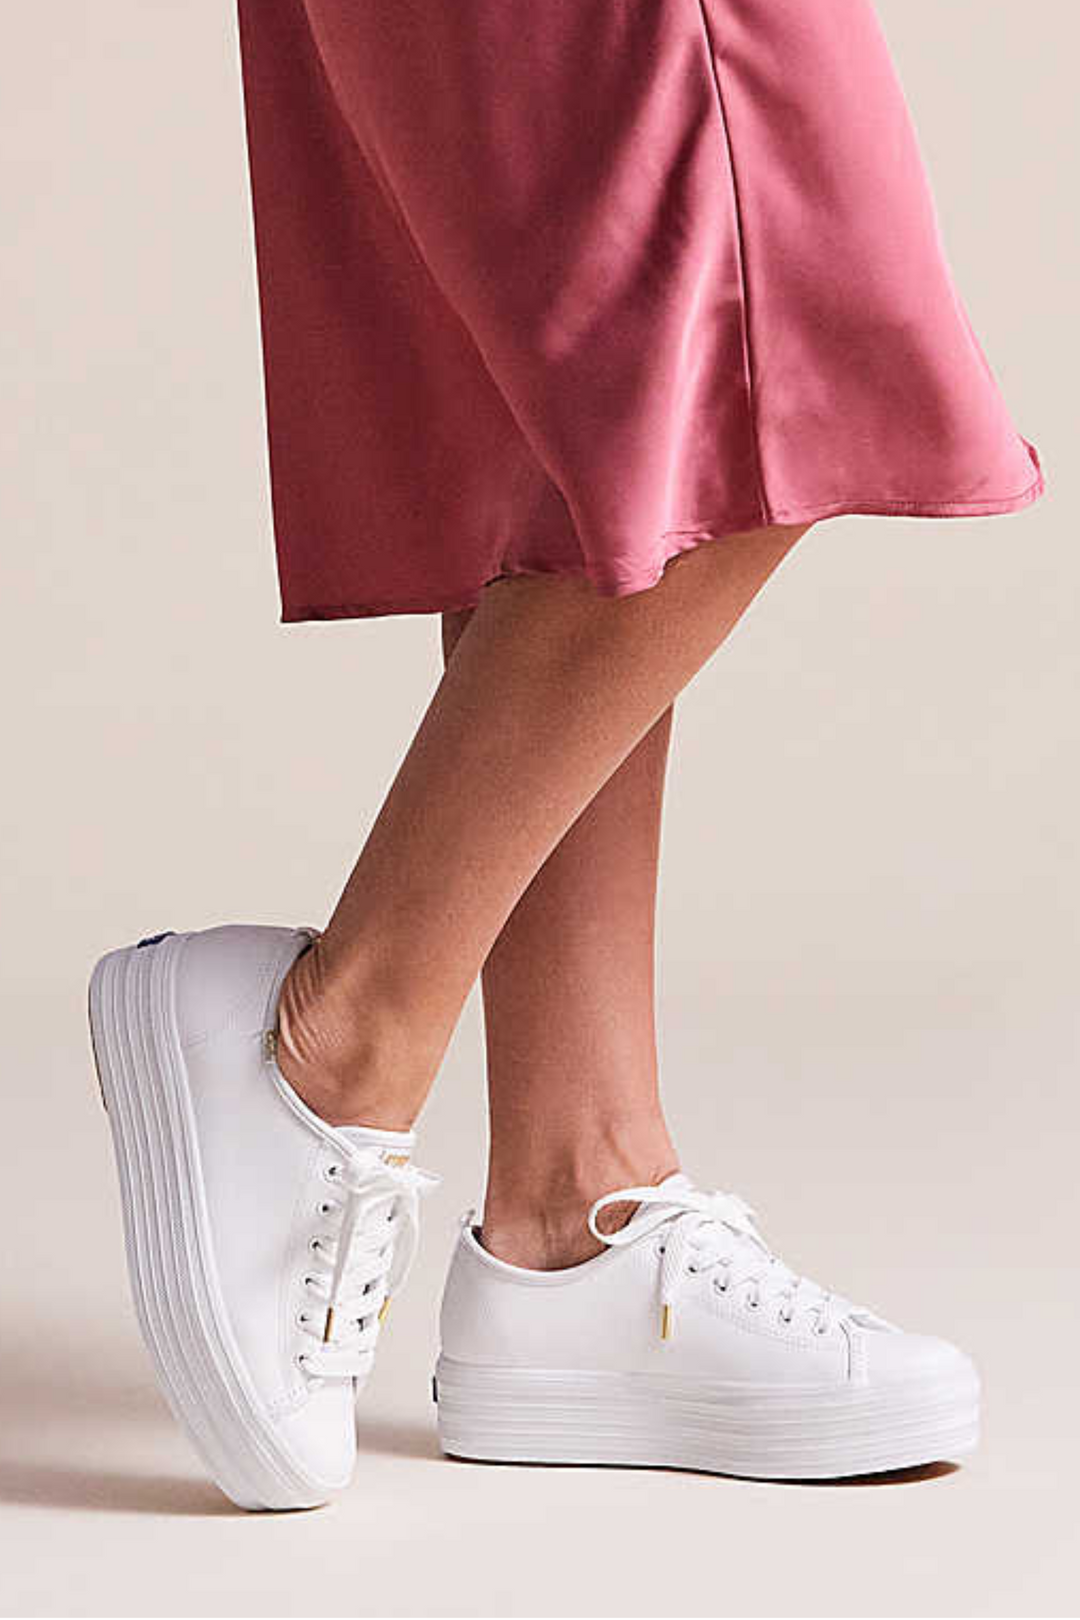 KEDS Triple Up Leather Sneaker